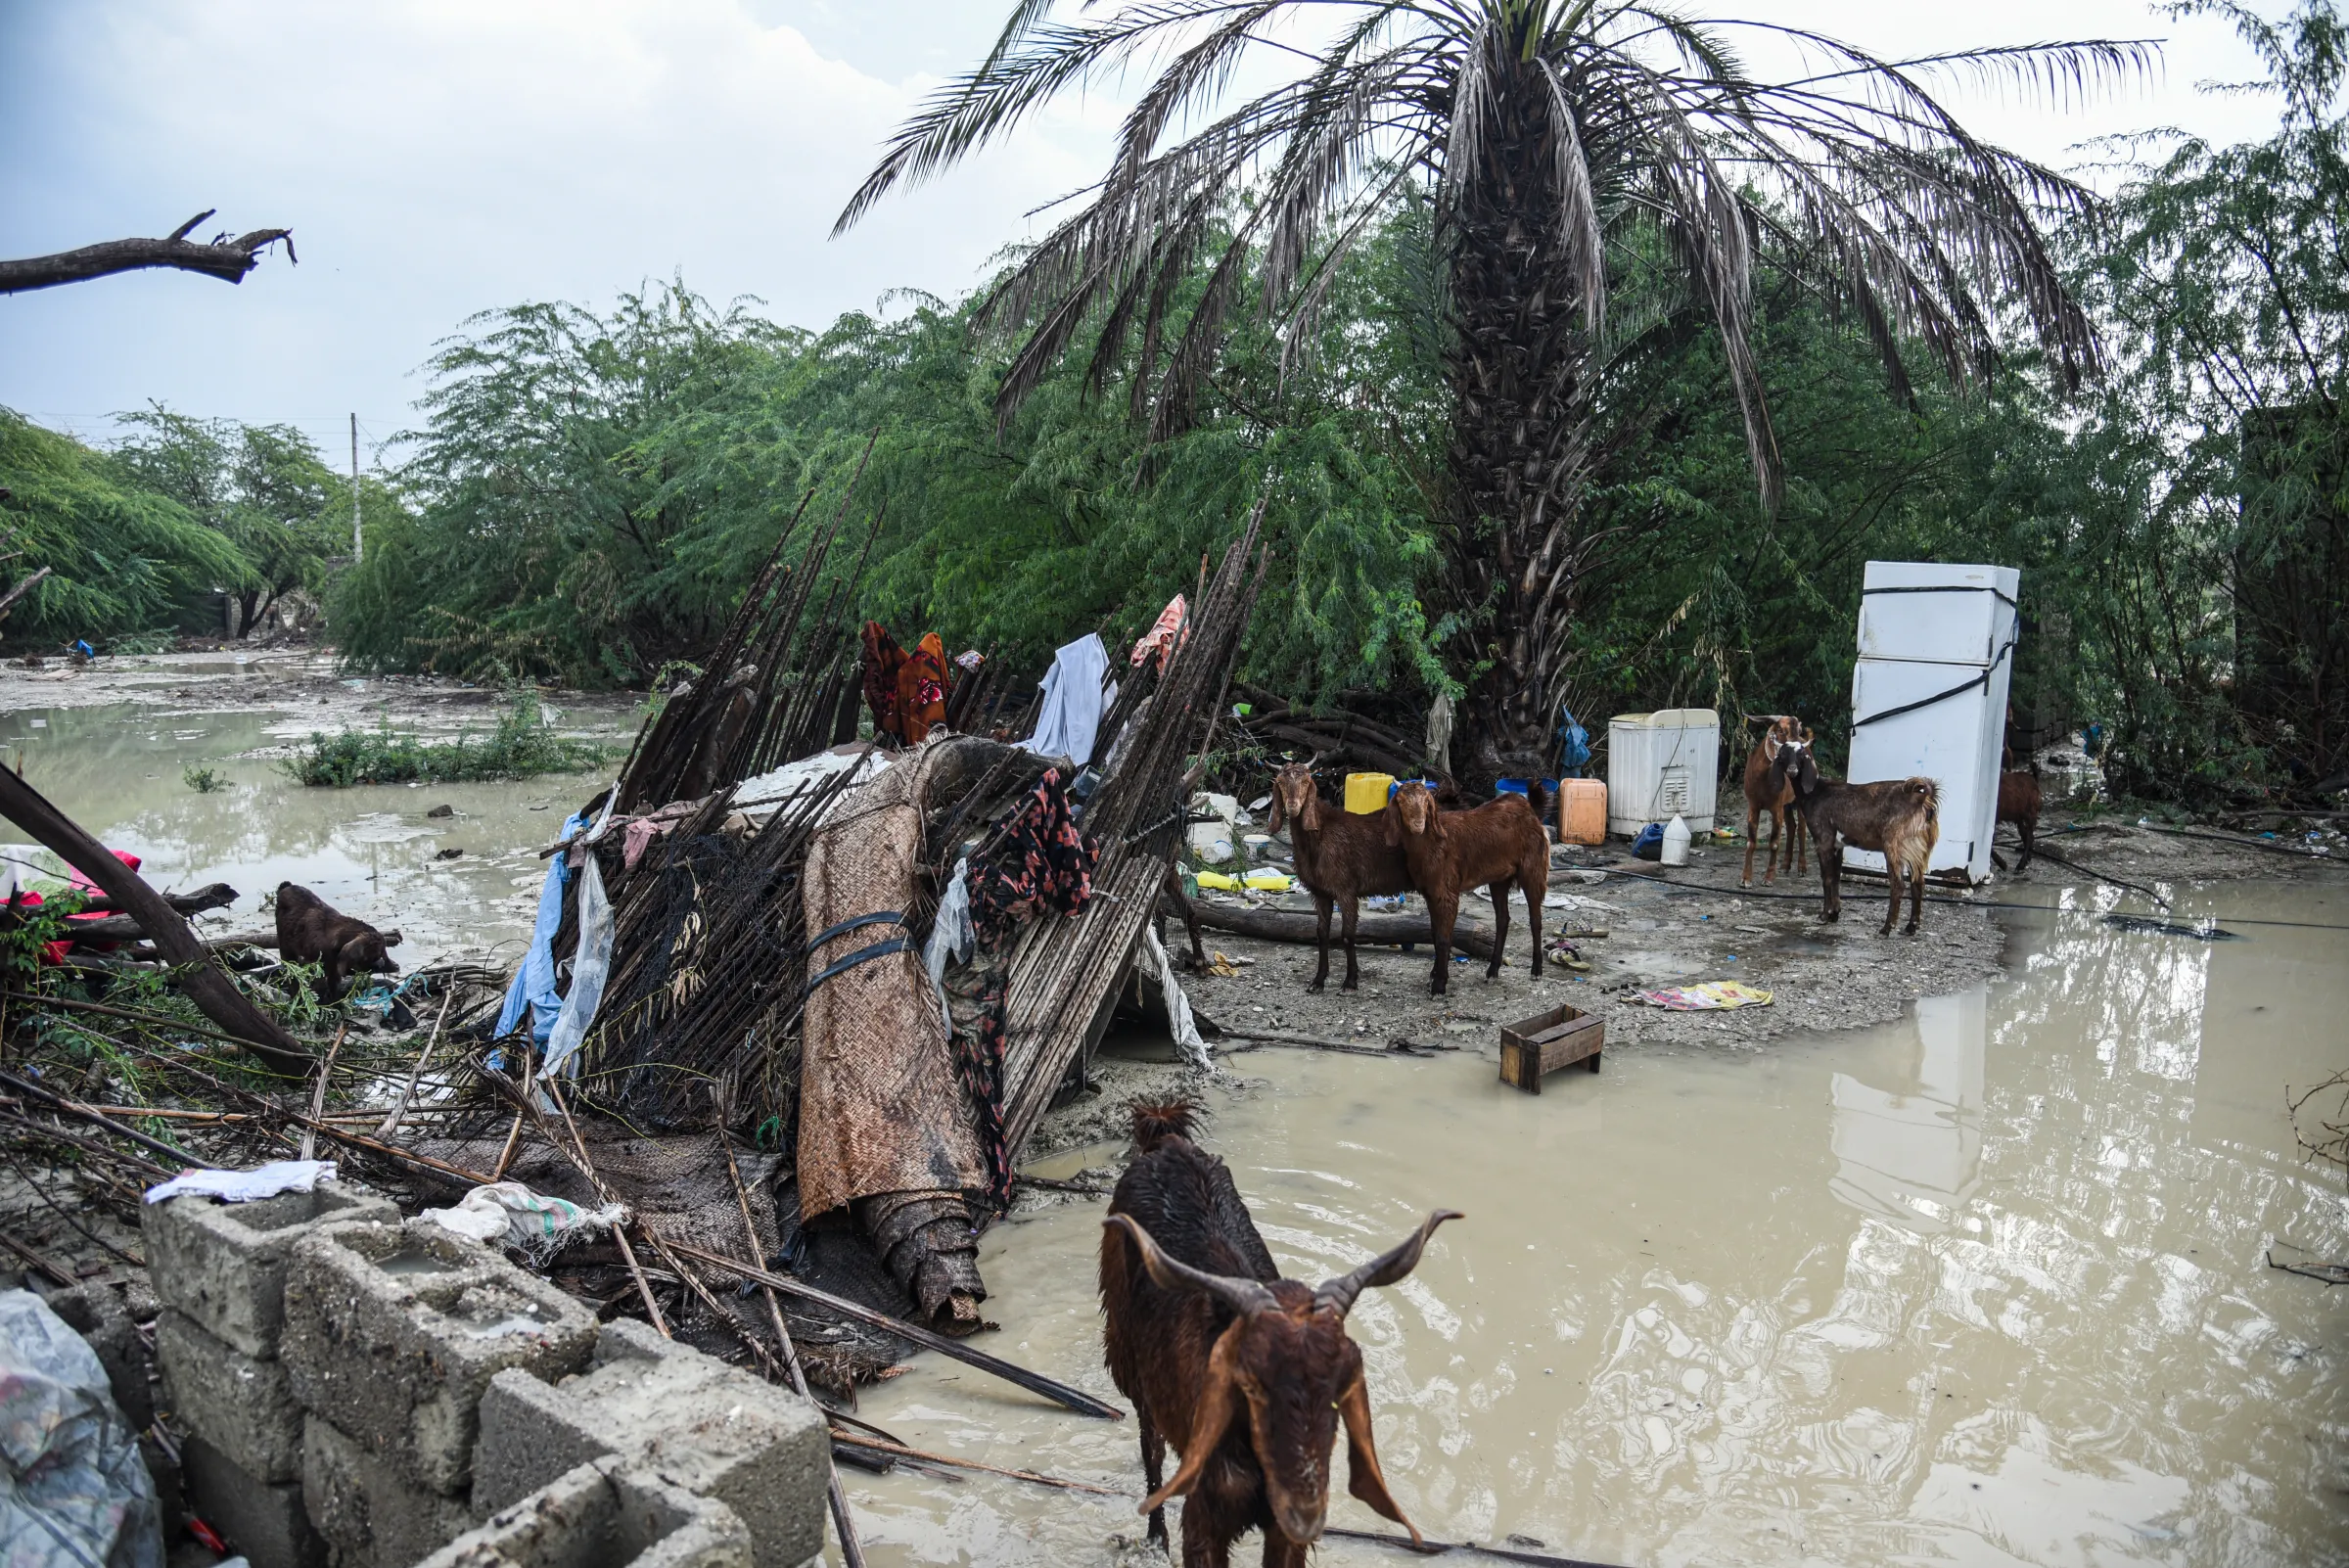 Goats wander among homes and furniture damaged by flooding in Sistan and Baluchestan province in Iran, January 2020